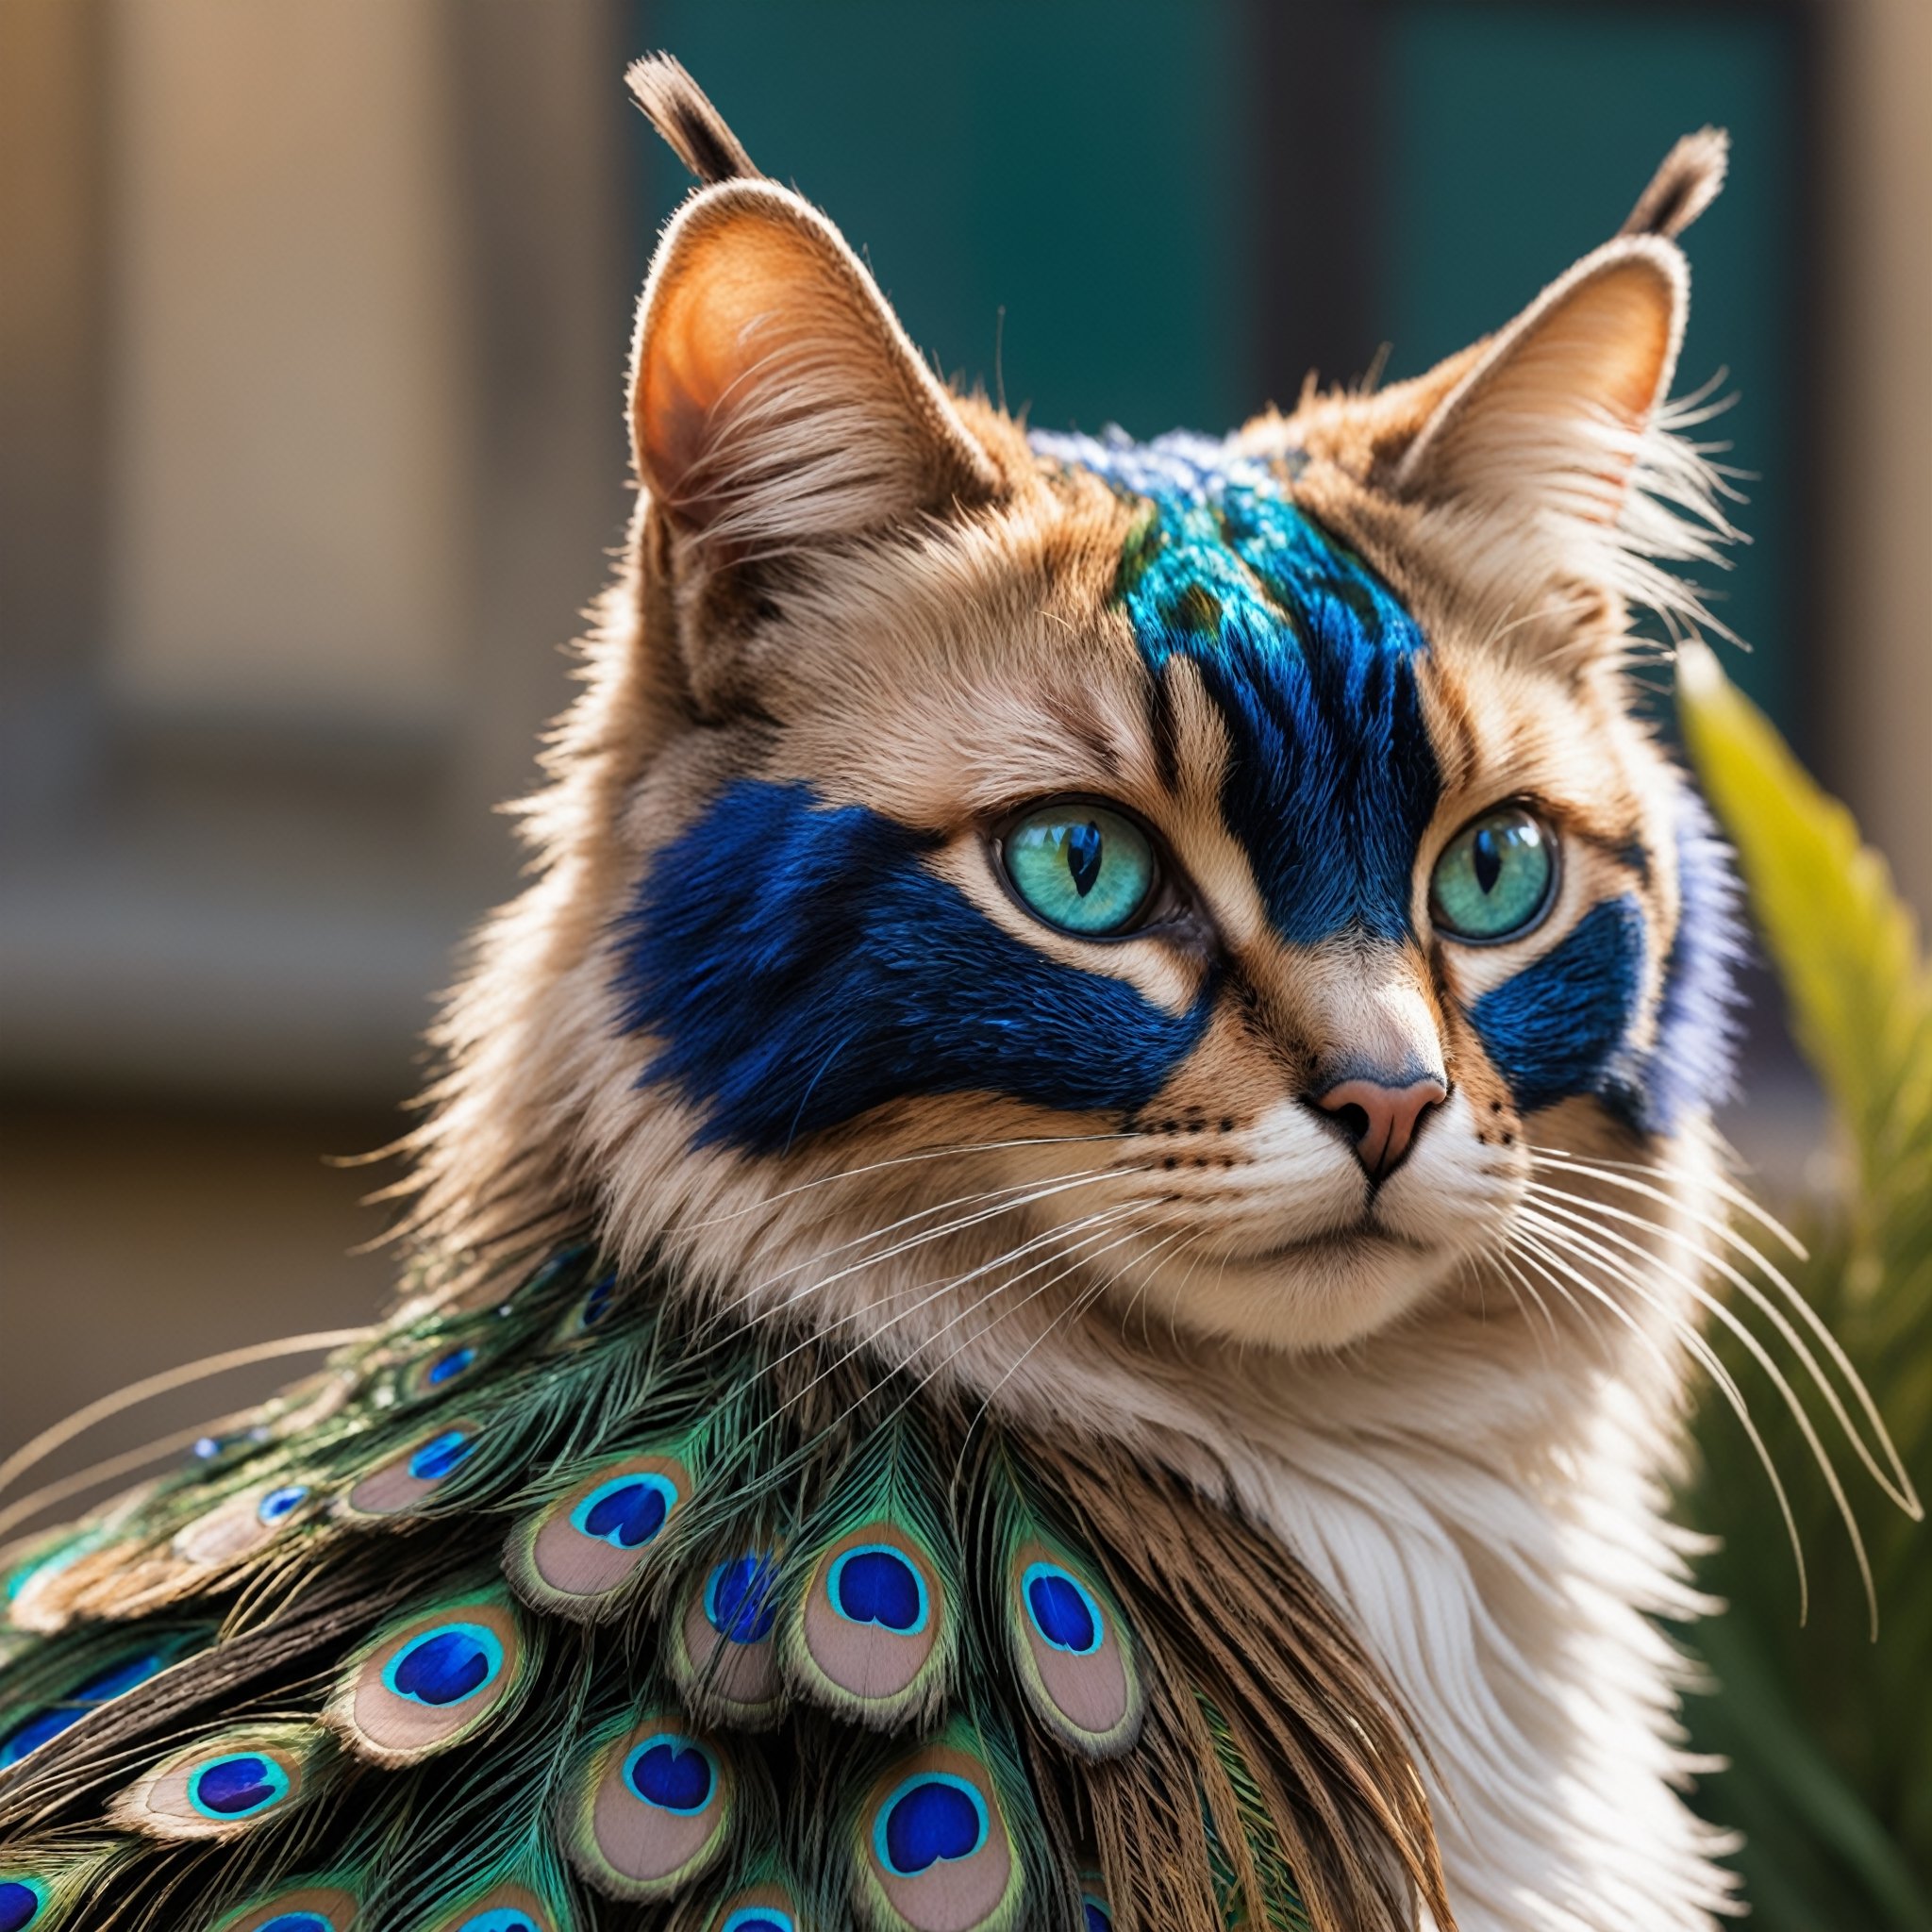 Detailed  closeup photo, of a peacock cat, peacock feathers, detailed eyes, natural light, castle gardens background  